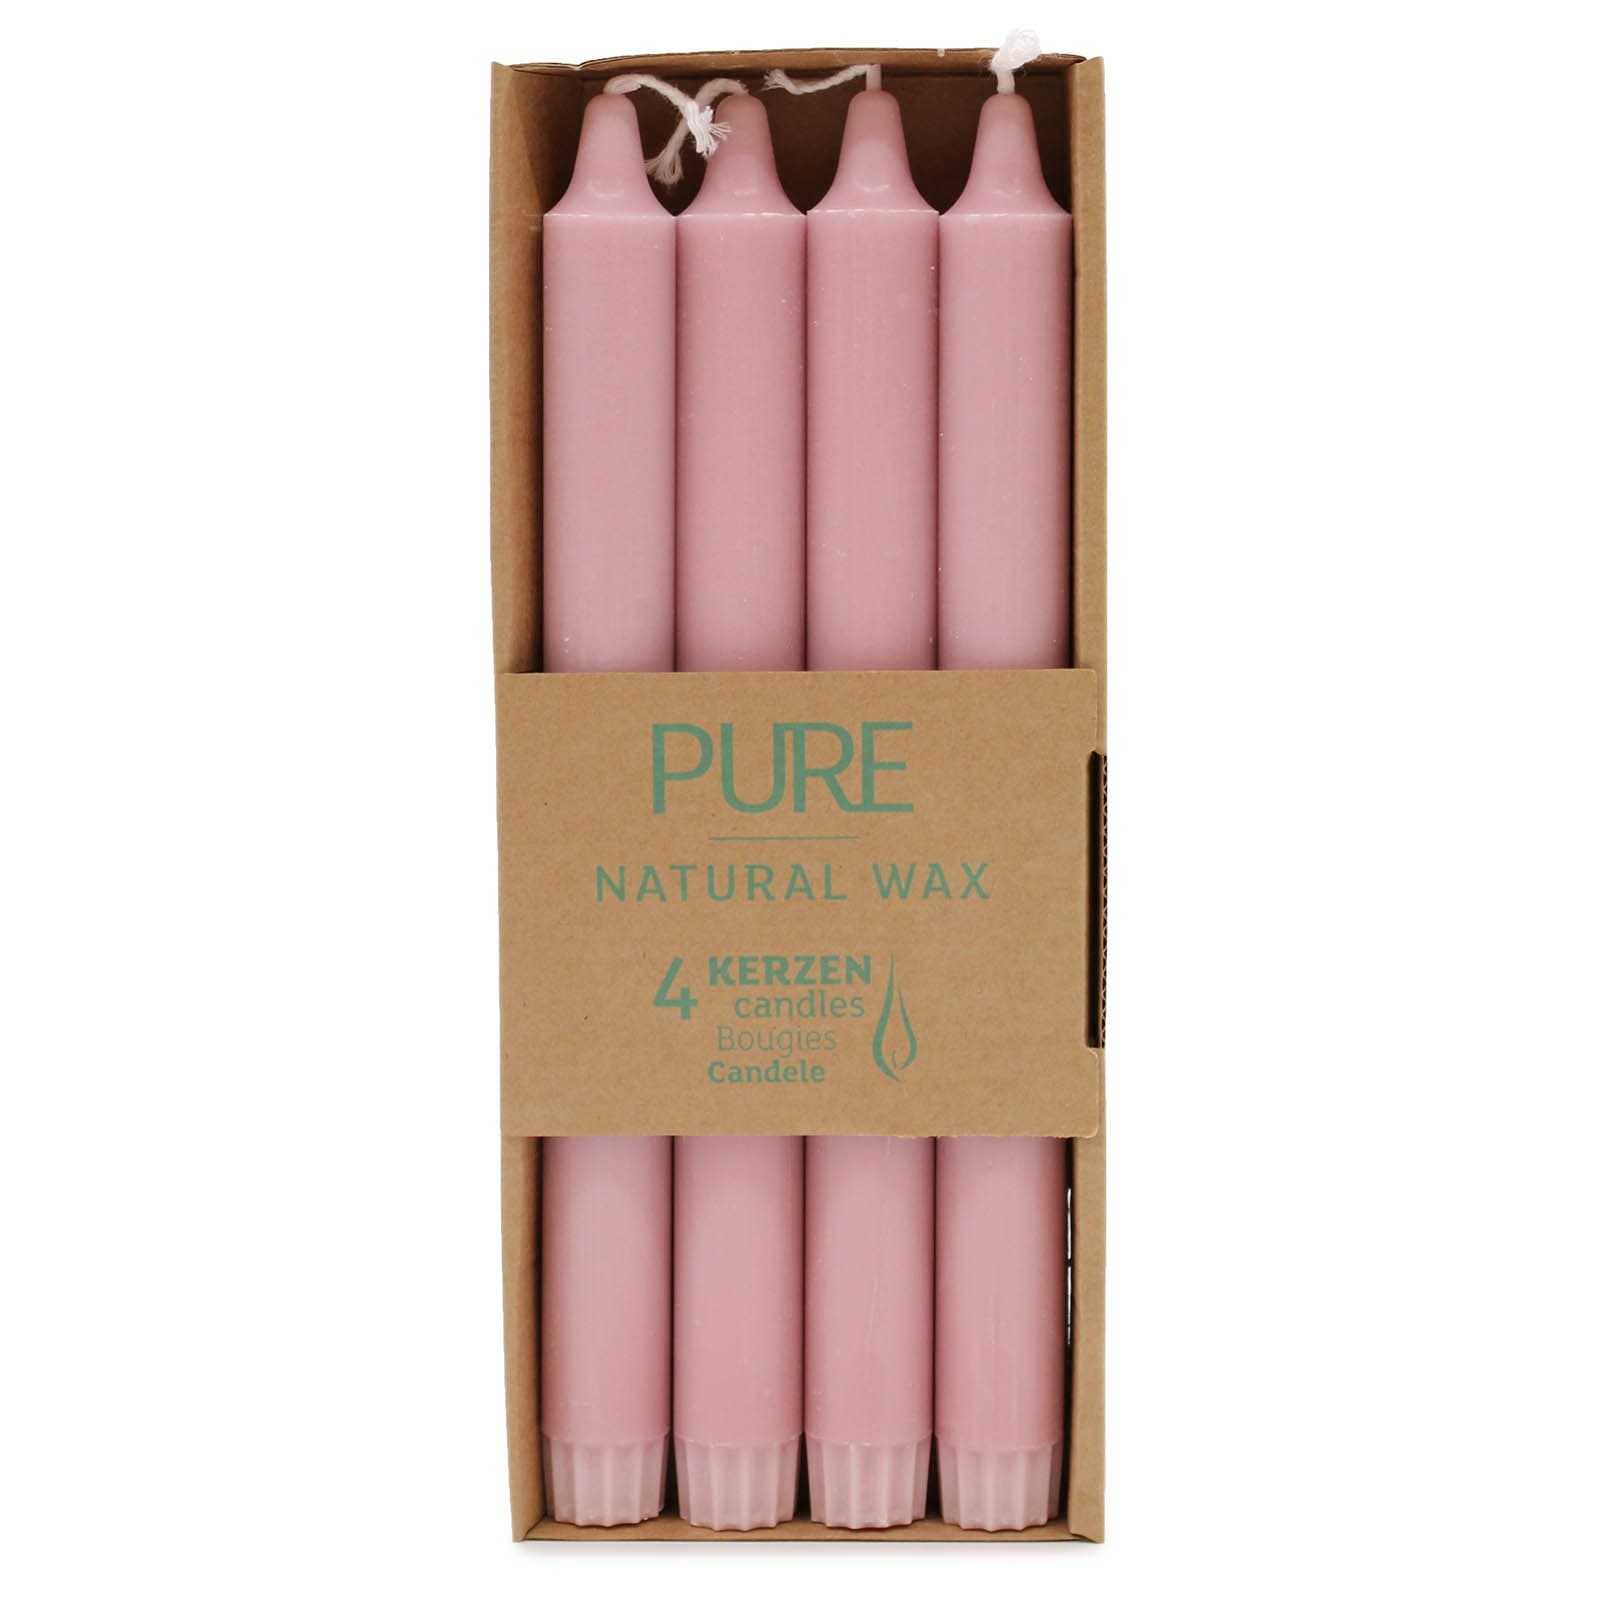 Pure Natural Wax Dinner Candle 25x2.3 - Antique Rose